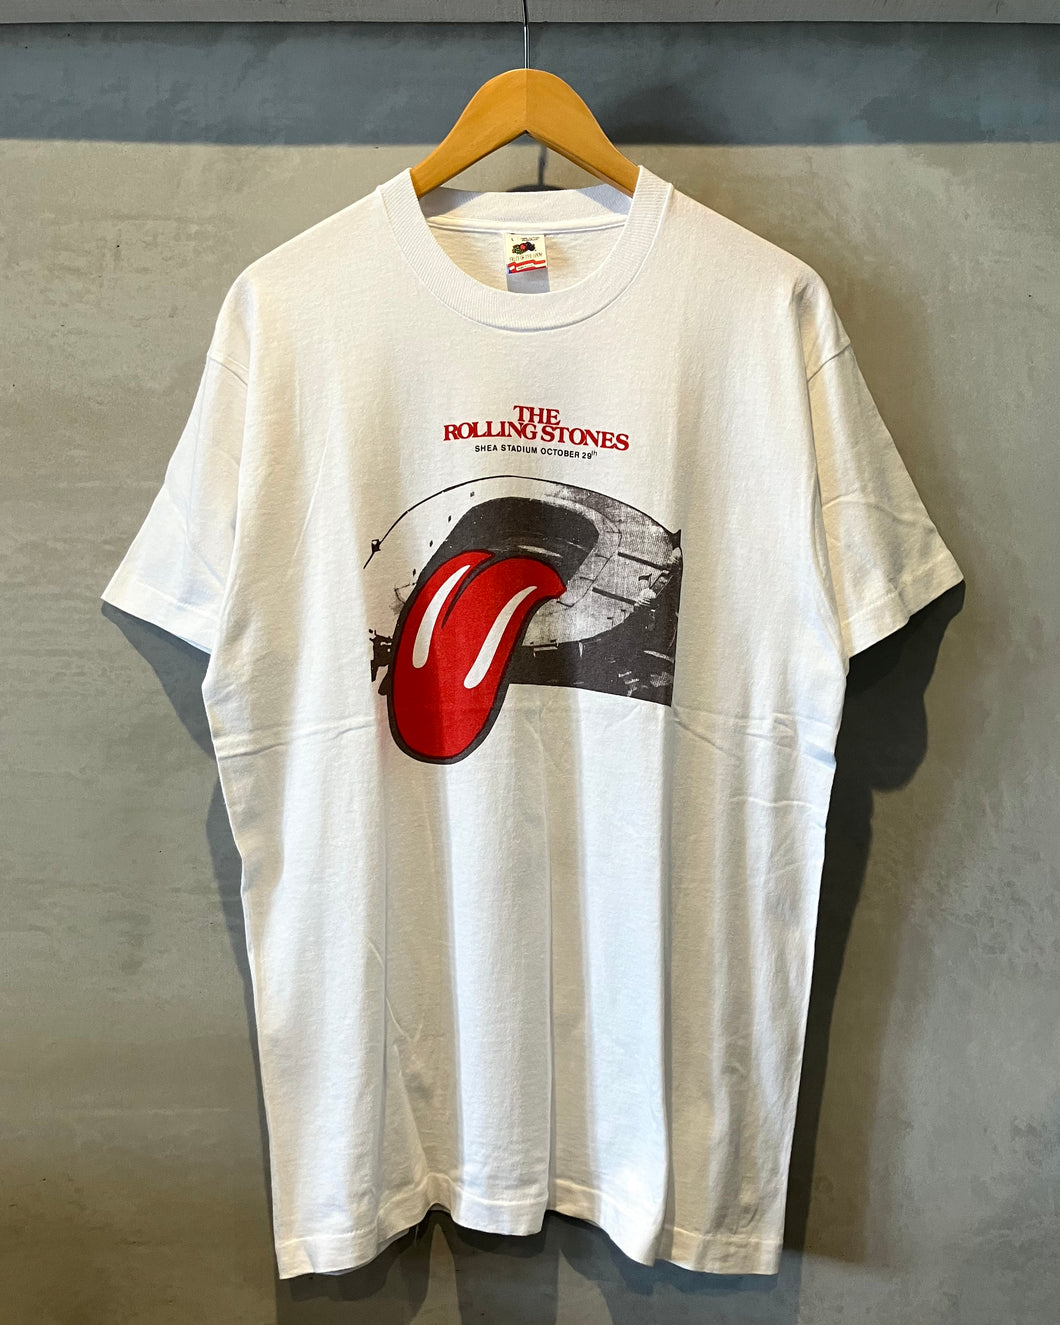 90’s FRUIT OF THE LOOM-THE ROLLING STONES-T-shirt-(size L)Made in U.S.A.